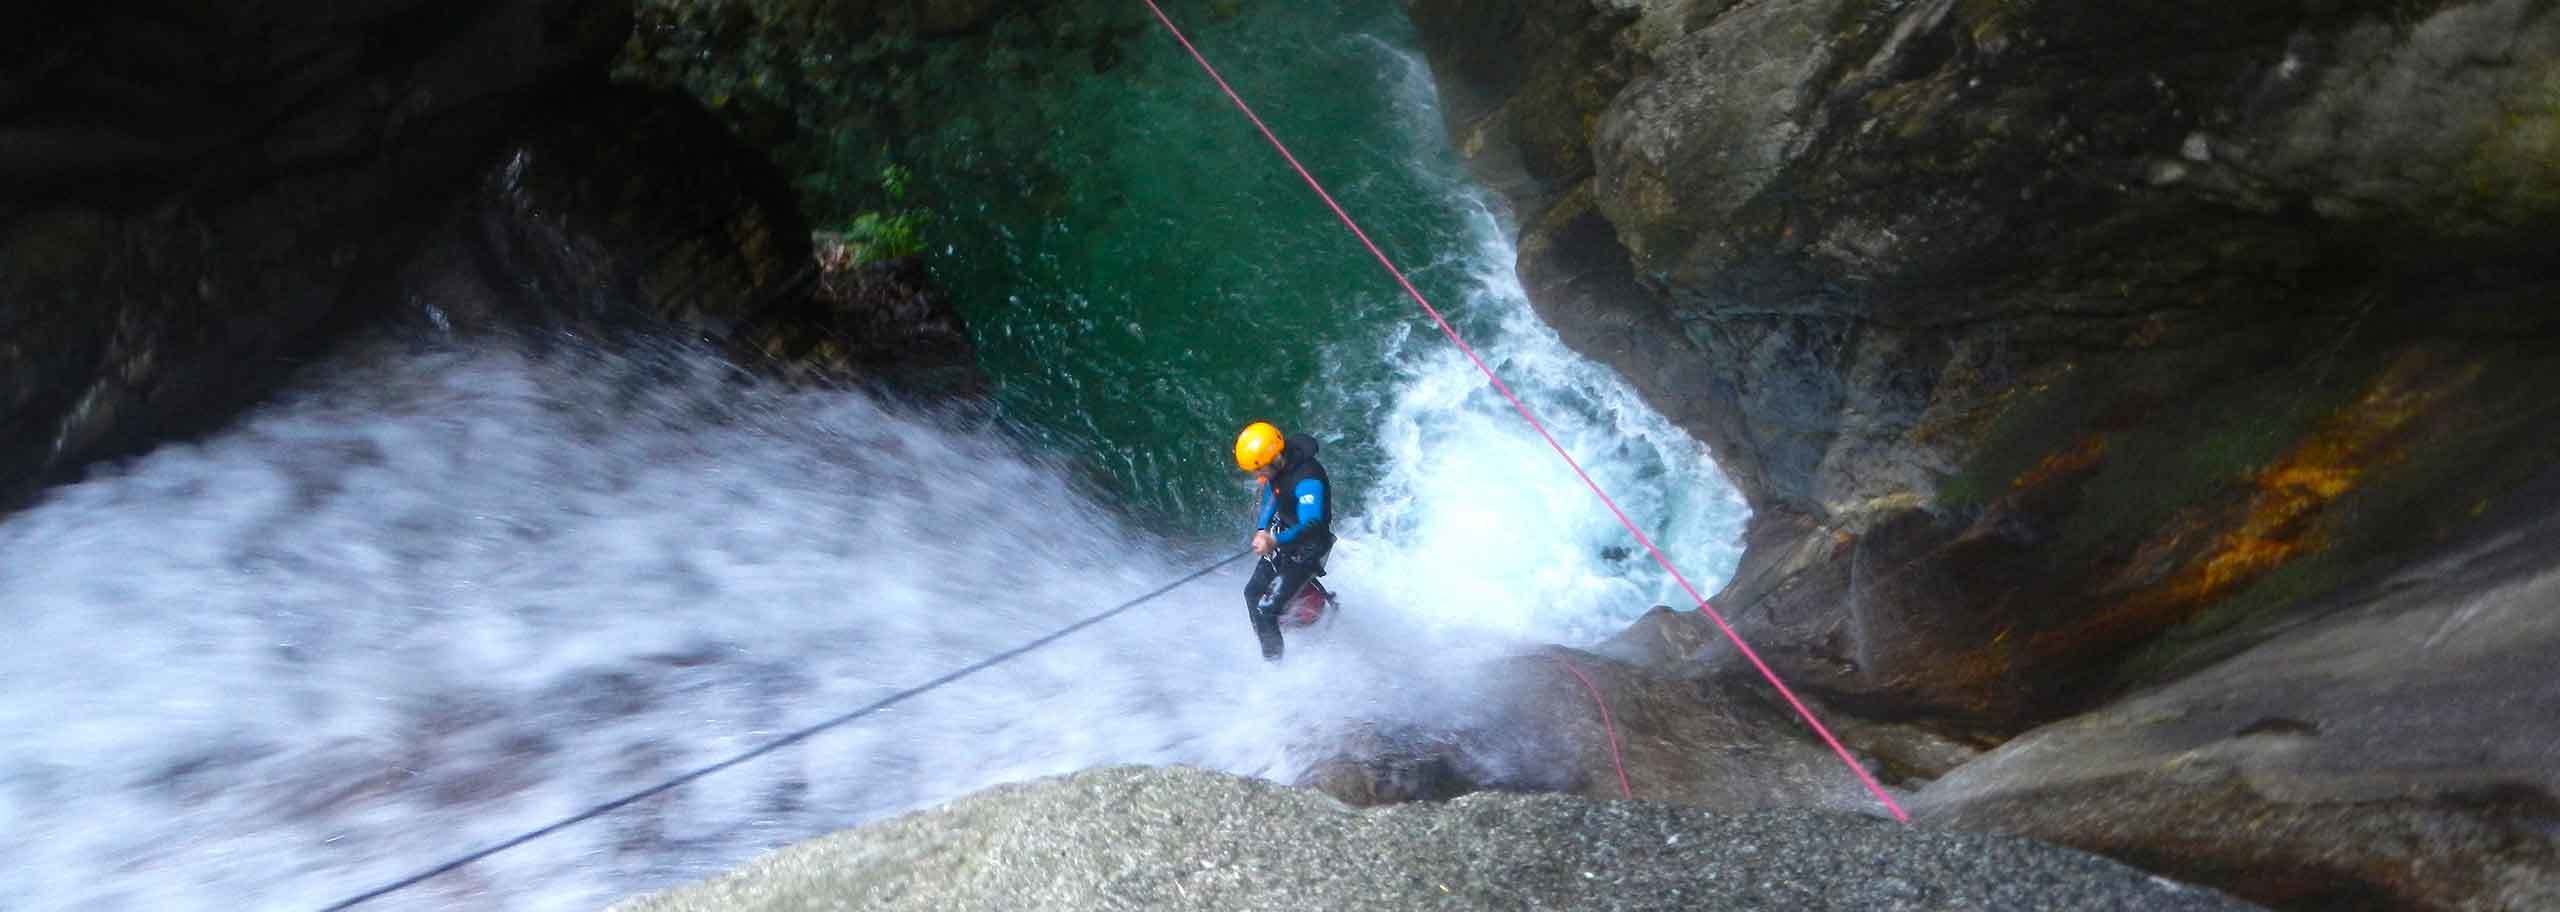 Canyoning in Cortina d'Ampezzo